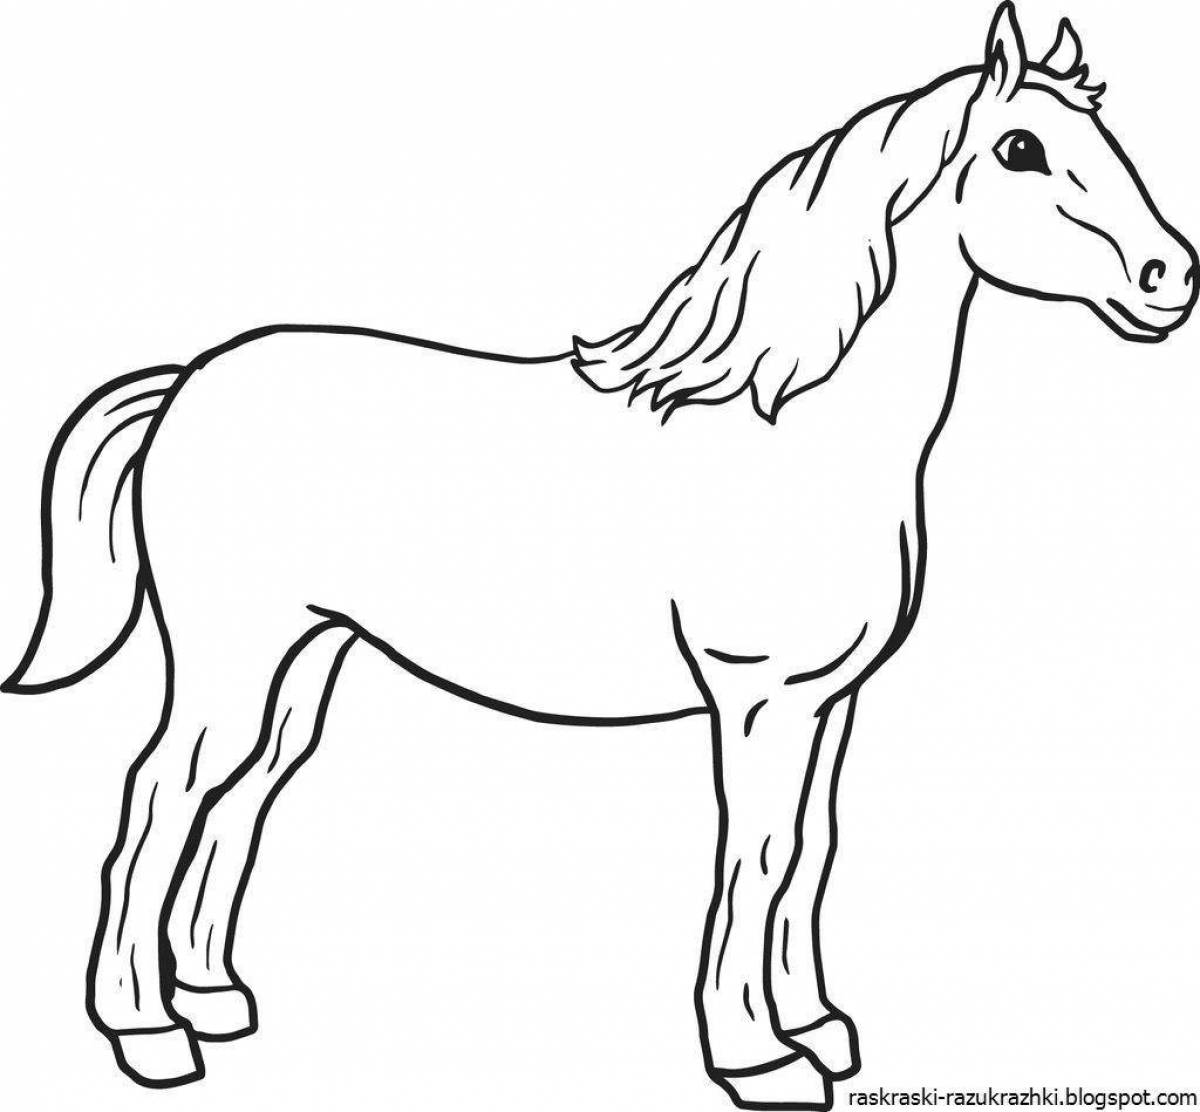 Horse drawing #1